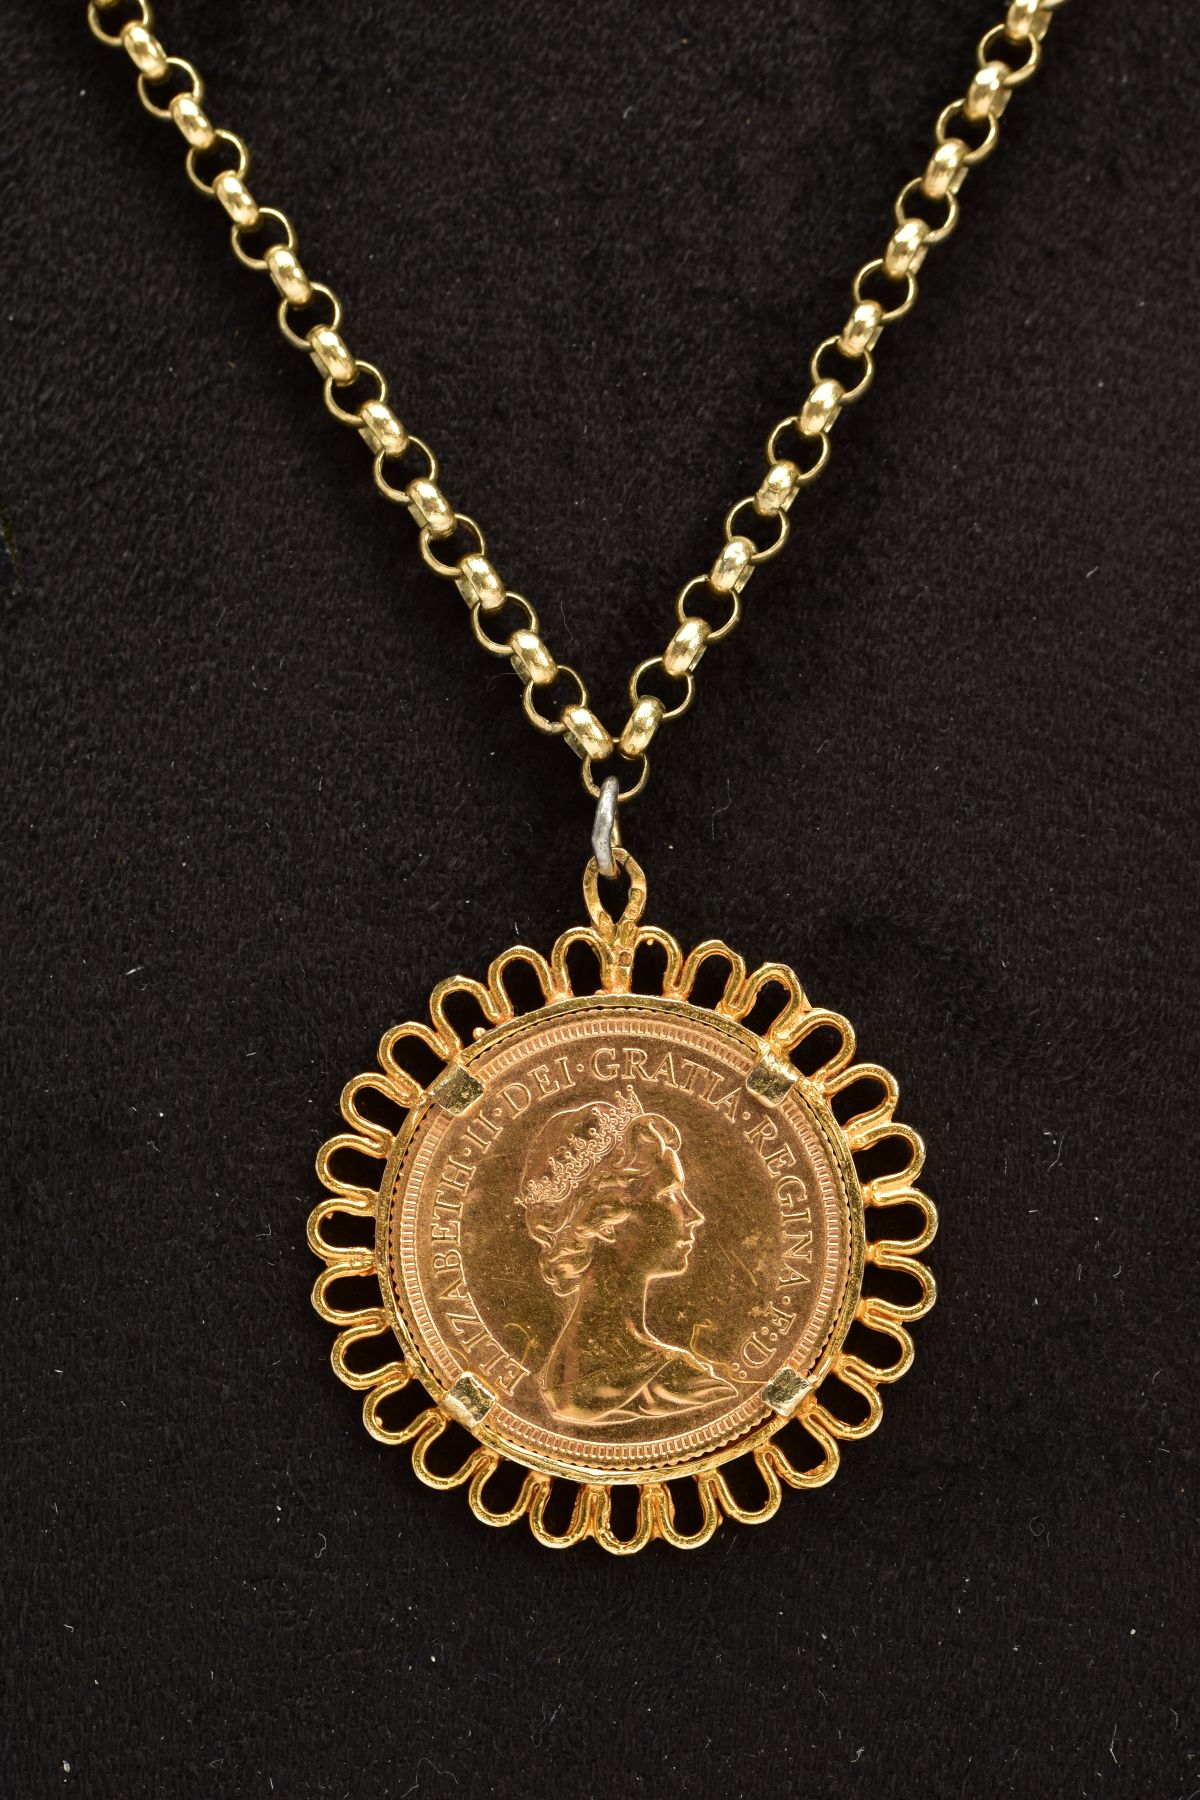 A 1979 FULL SOVEREIGN MOUNTED AS A PENDANT ON CHAIN, within a collet mount and scallop edge